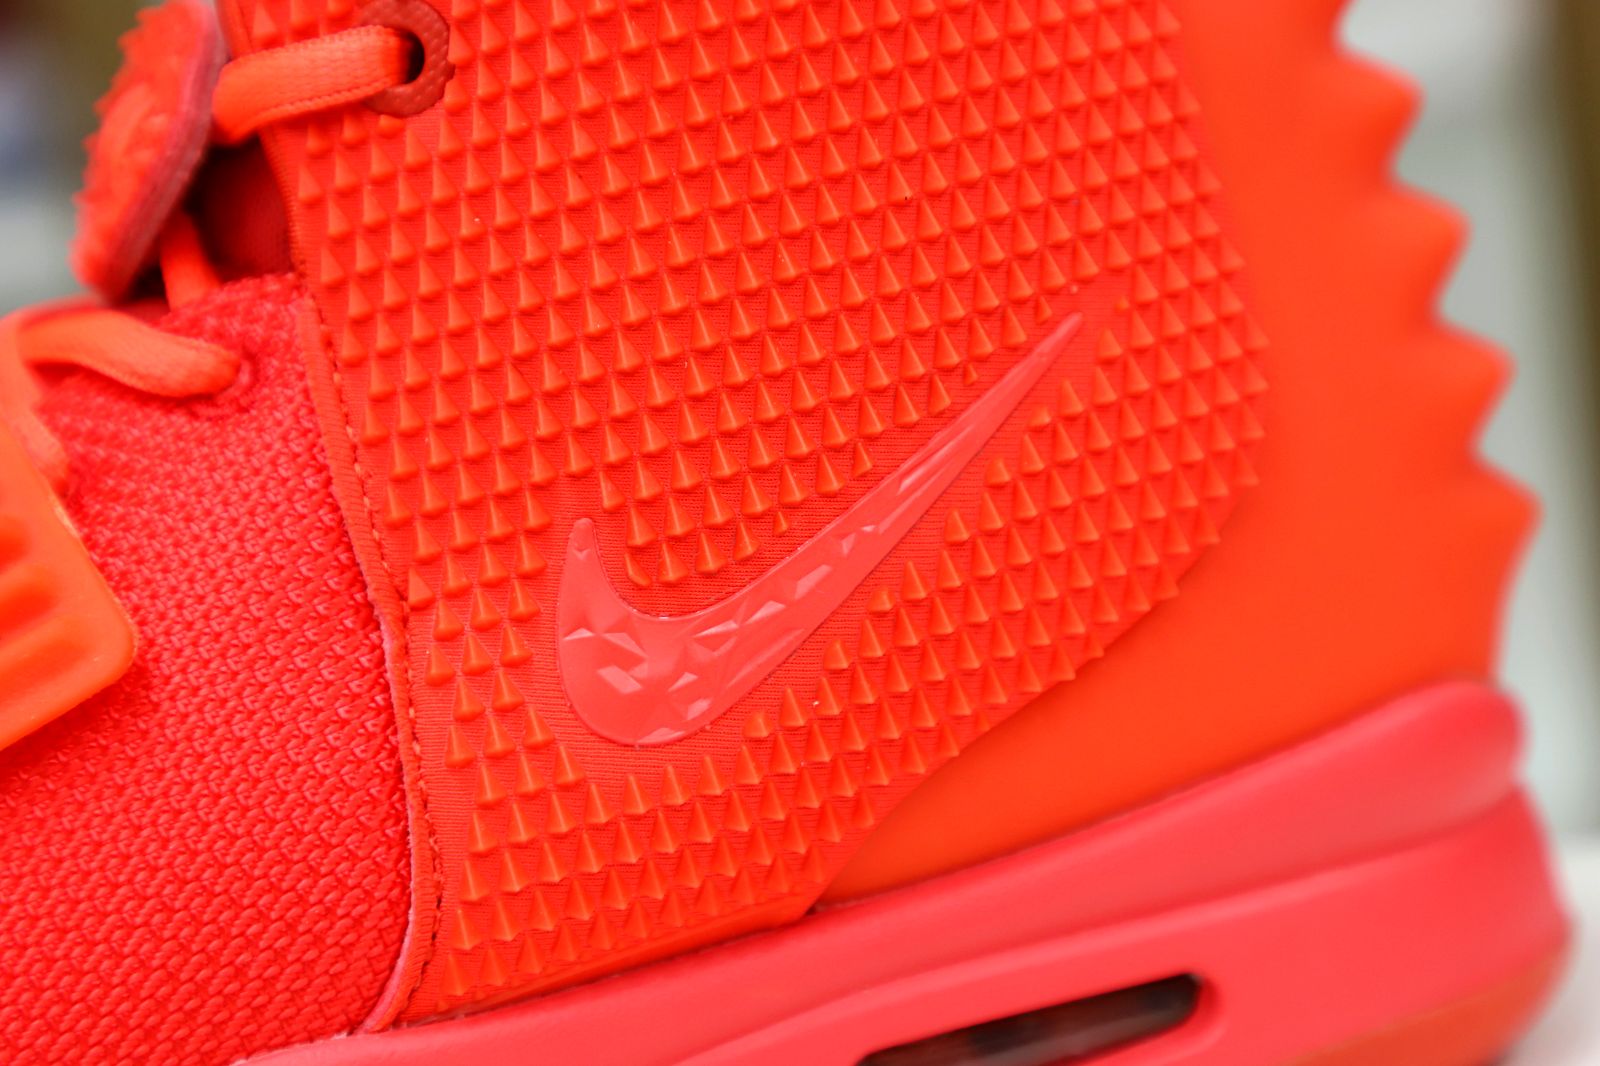 Nike Air Yeezy 2 red october